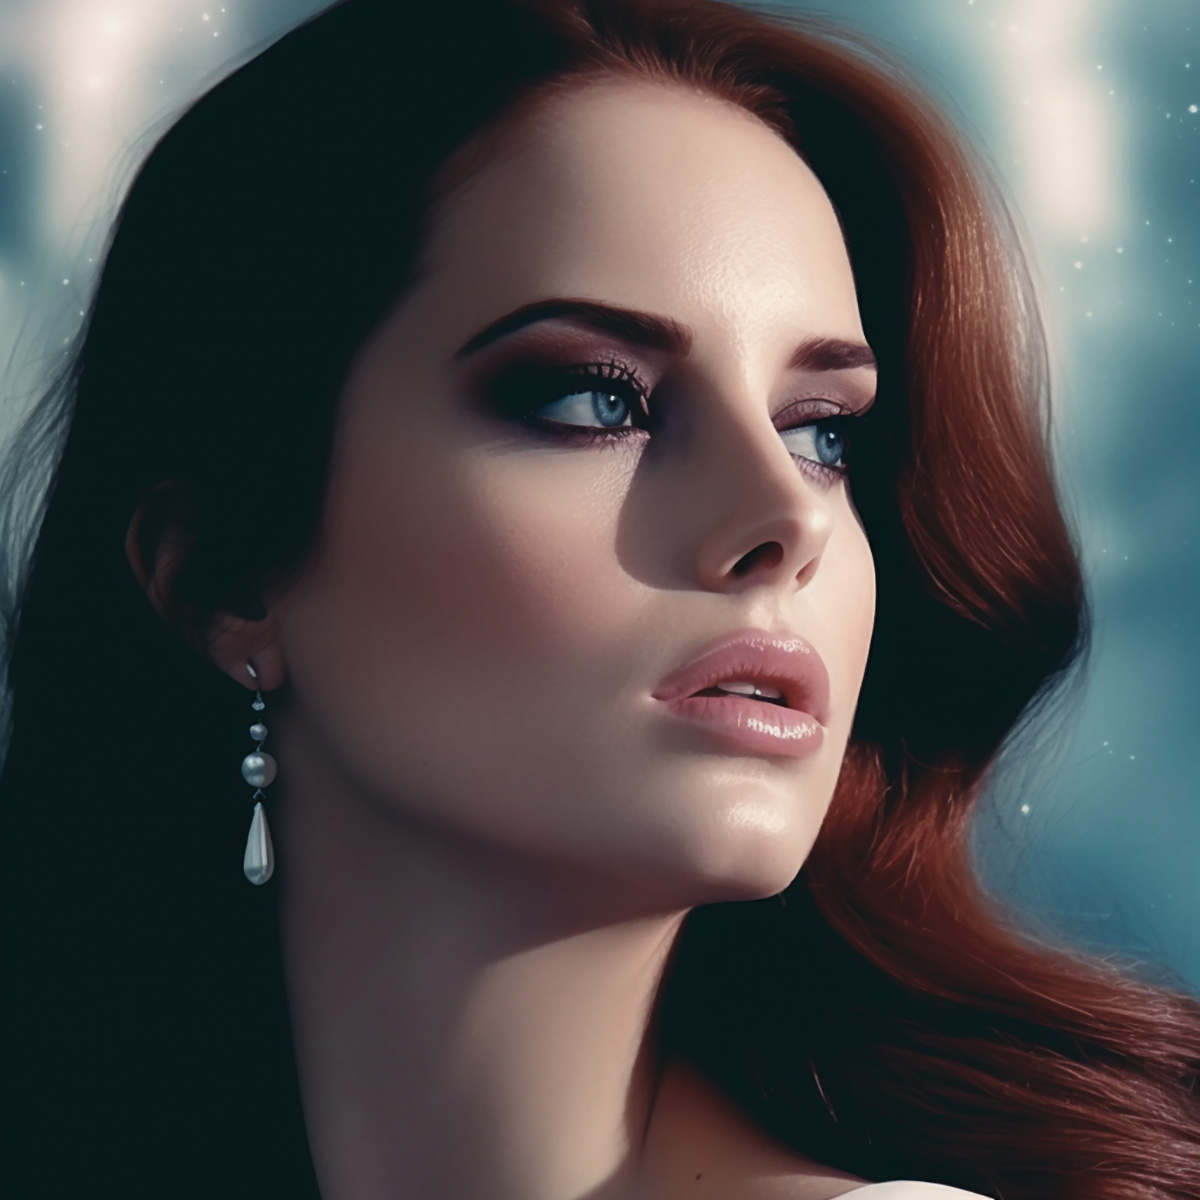 AI image of Lana del Rey made with Midjourney